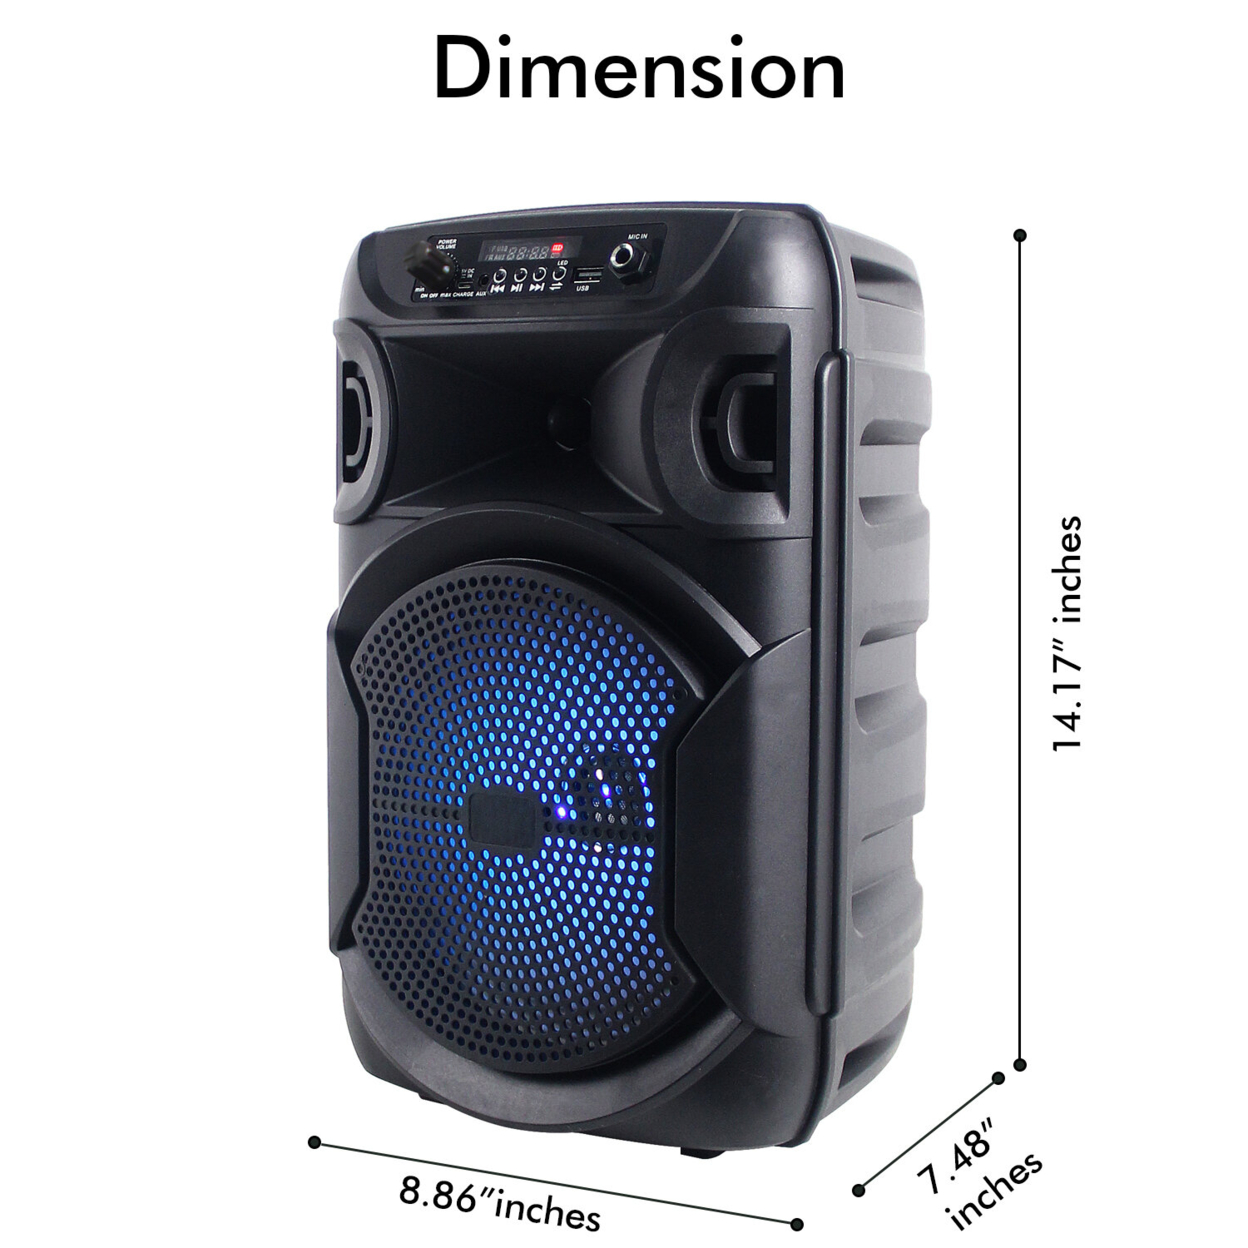 2 Set Technical Pro 8 Inch Portable 1000 watts Bluetooth Speaker w/ Woofer and Tweeter Party PA LED Speaker w/ - image 4 of 7